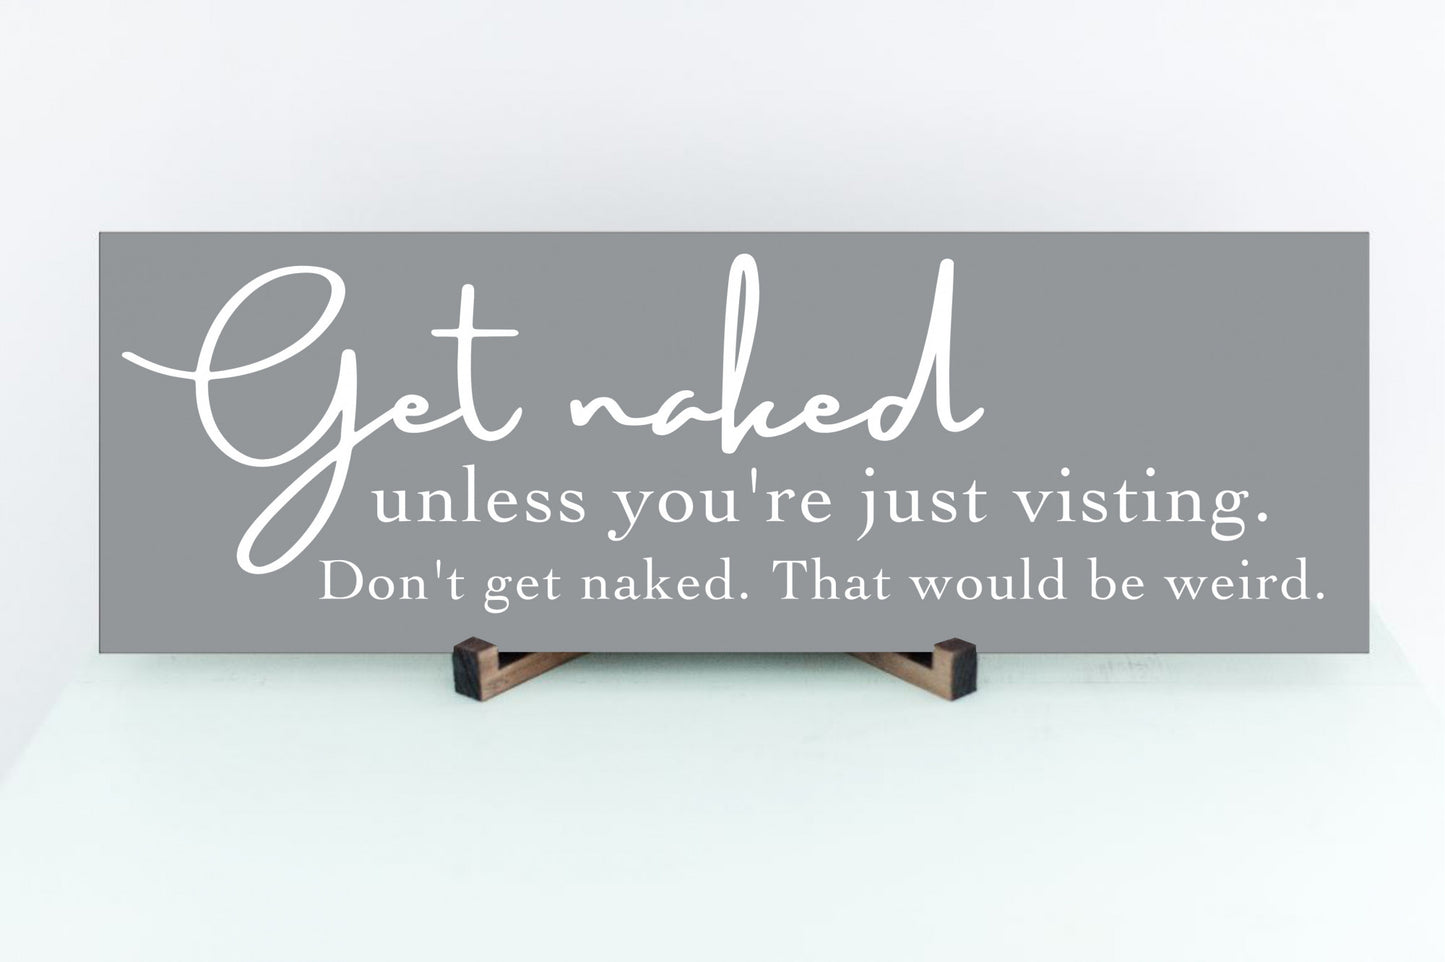 Get Naked Bathroom Sign, Grey with White